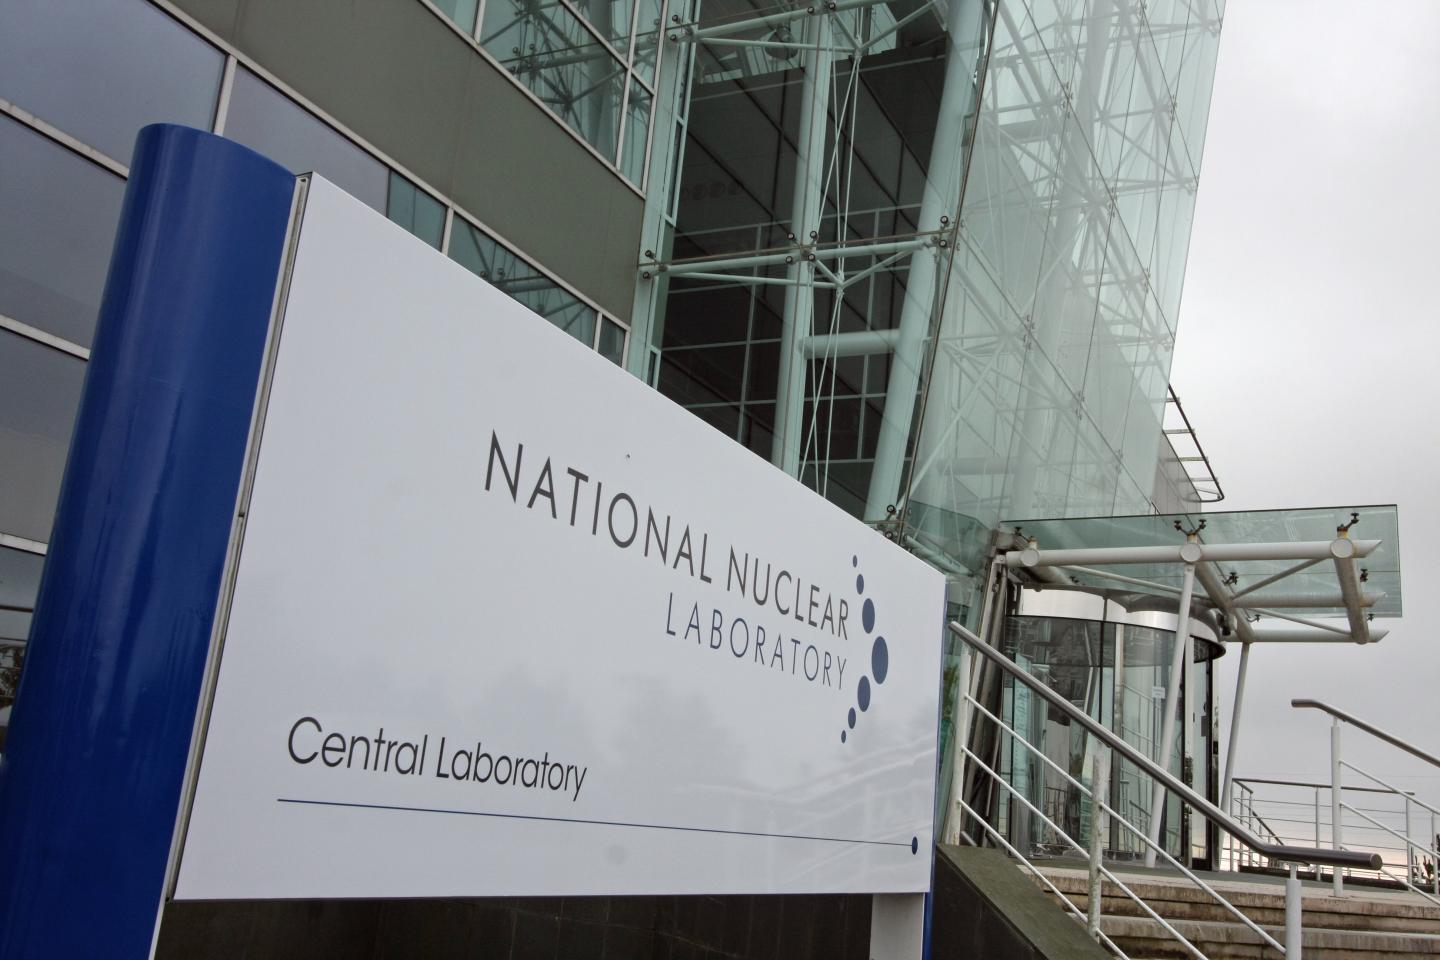 The National Nuclear Laboratory